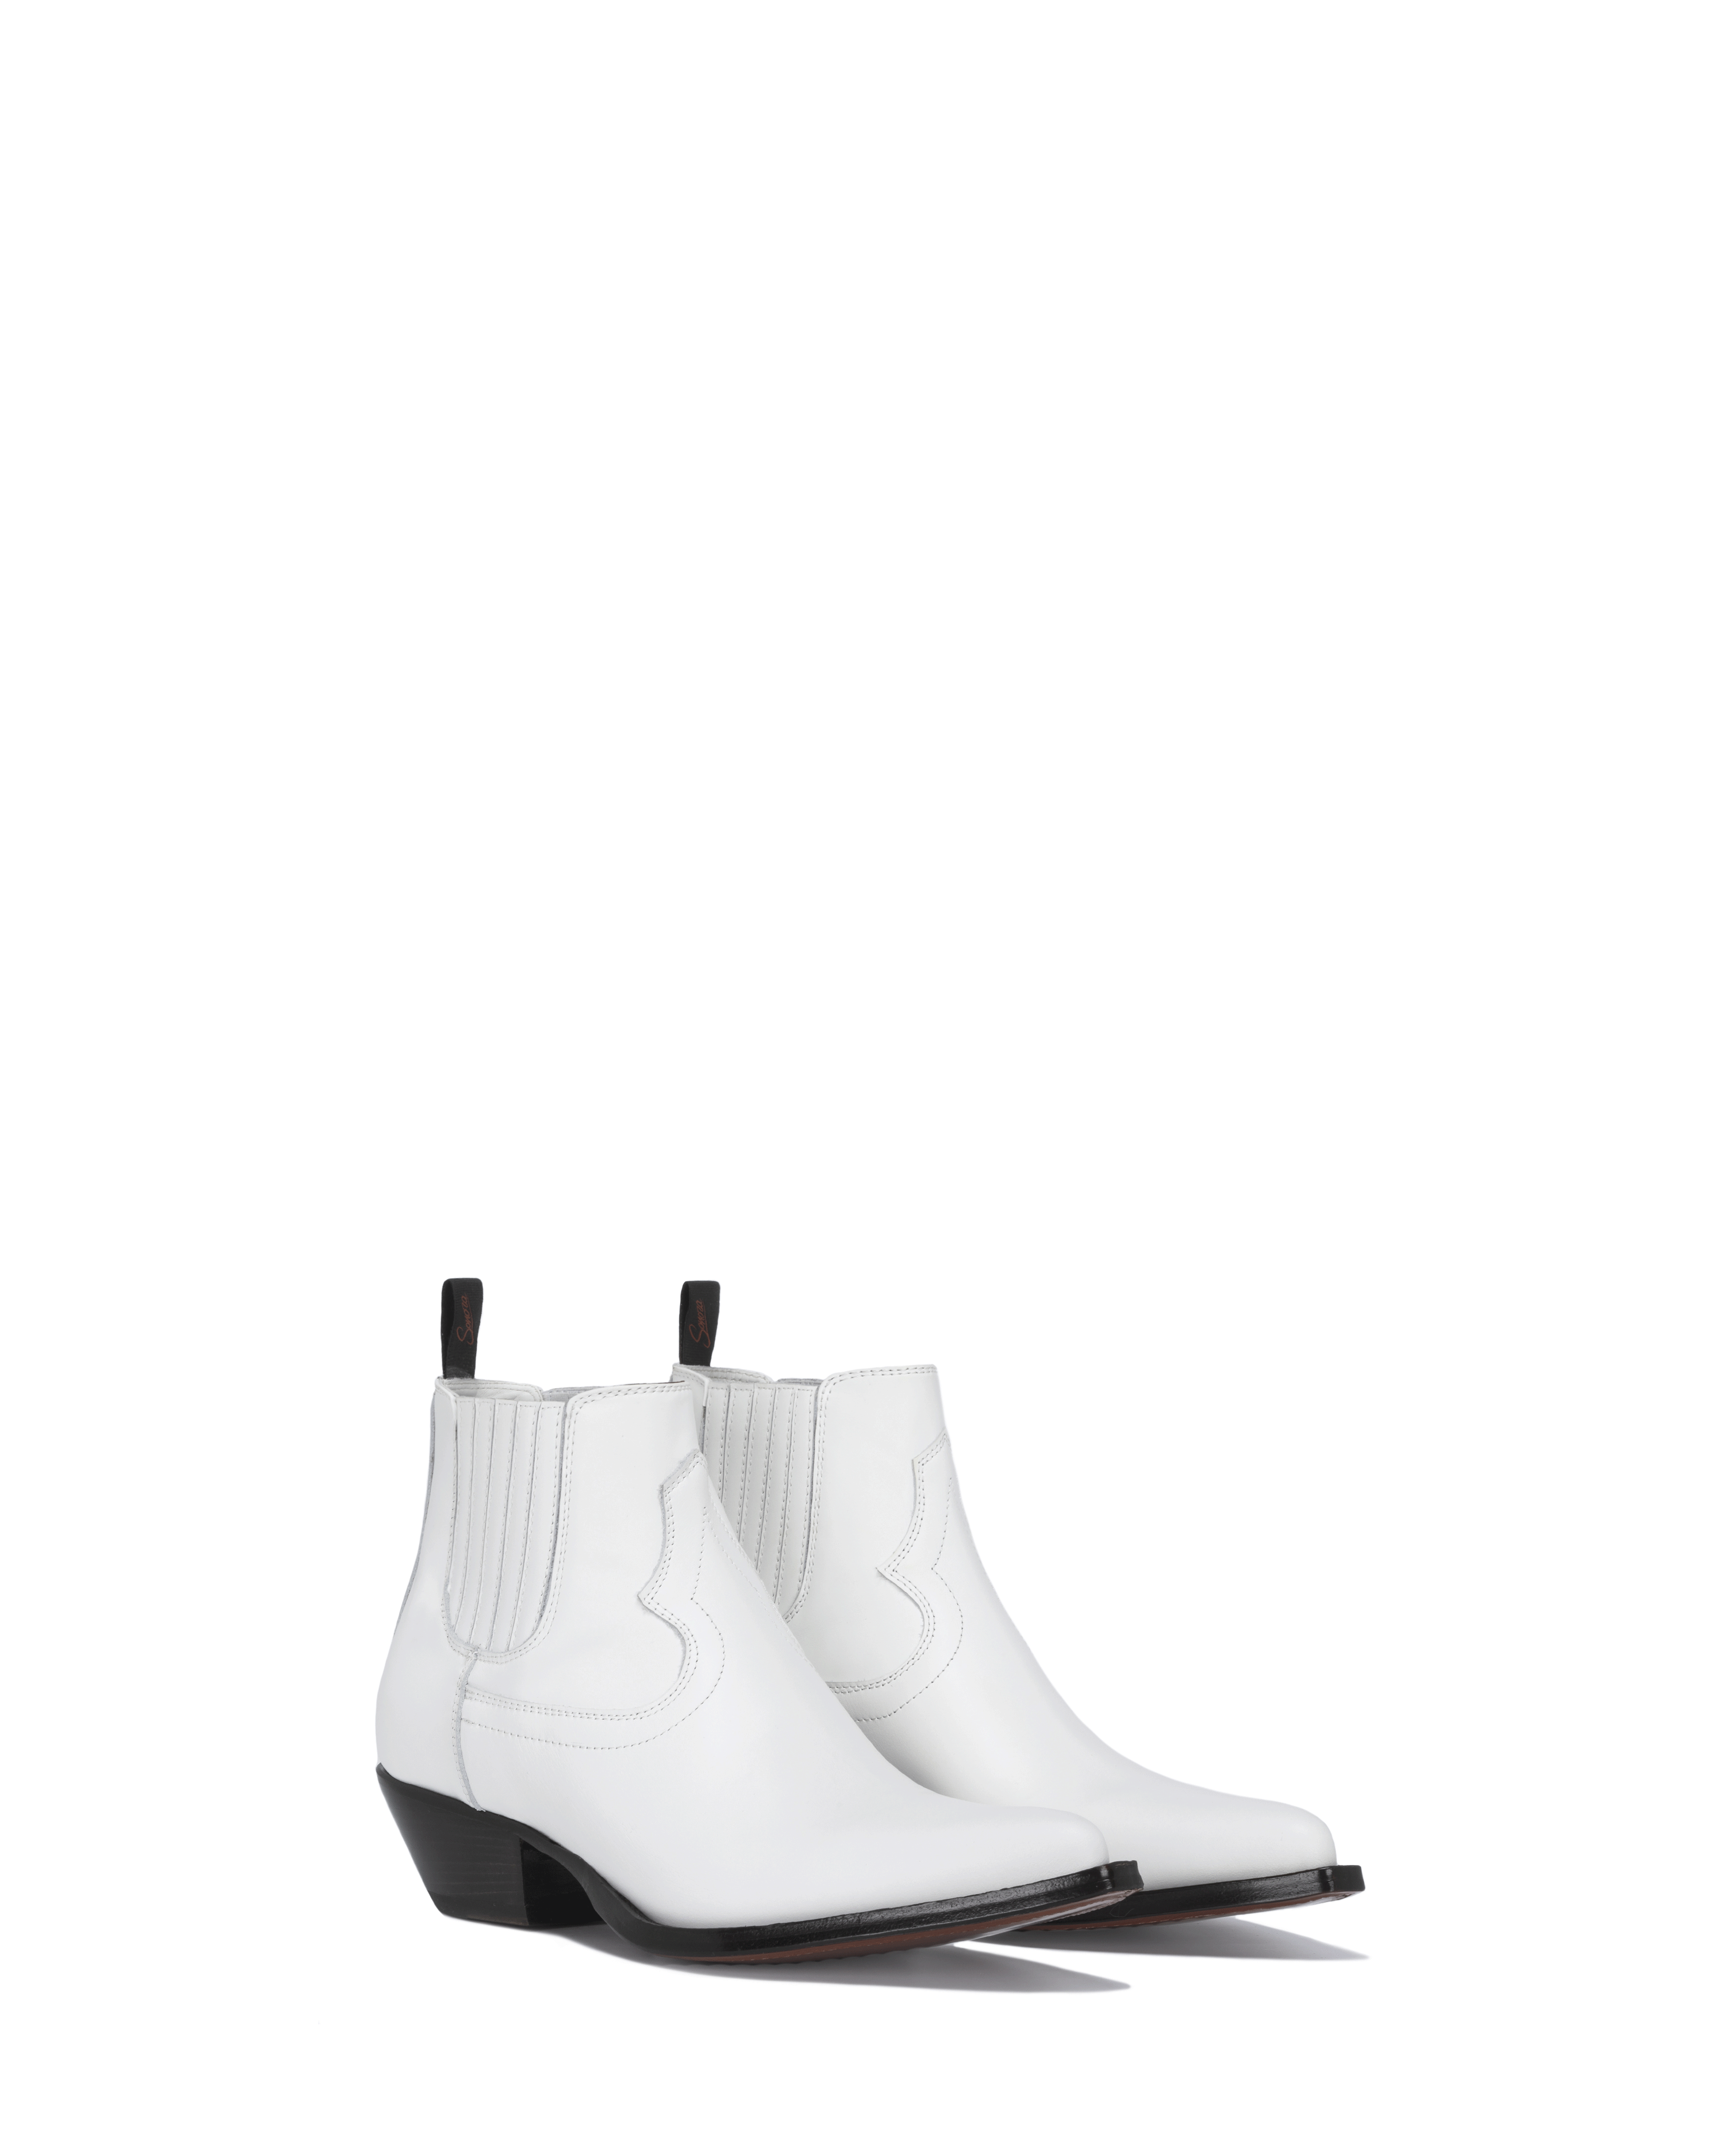 HIDALGO Men's Ankle Boots in White Calf_Front_02